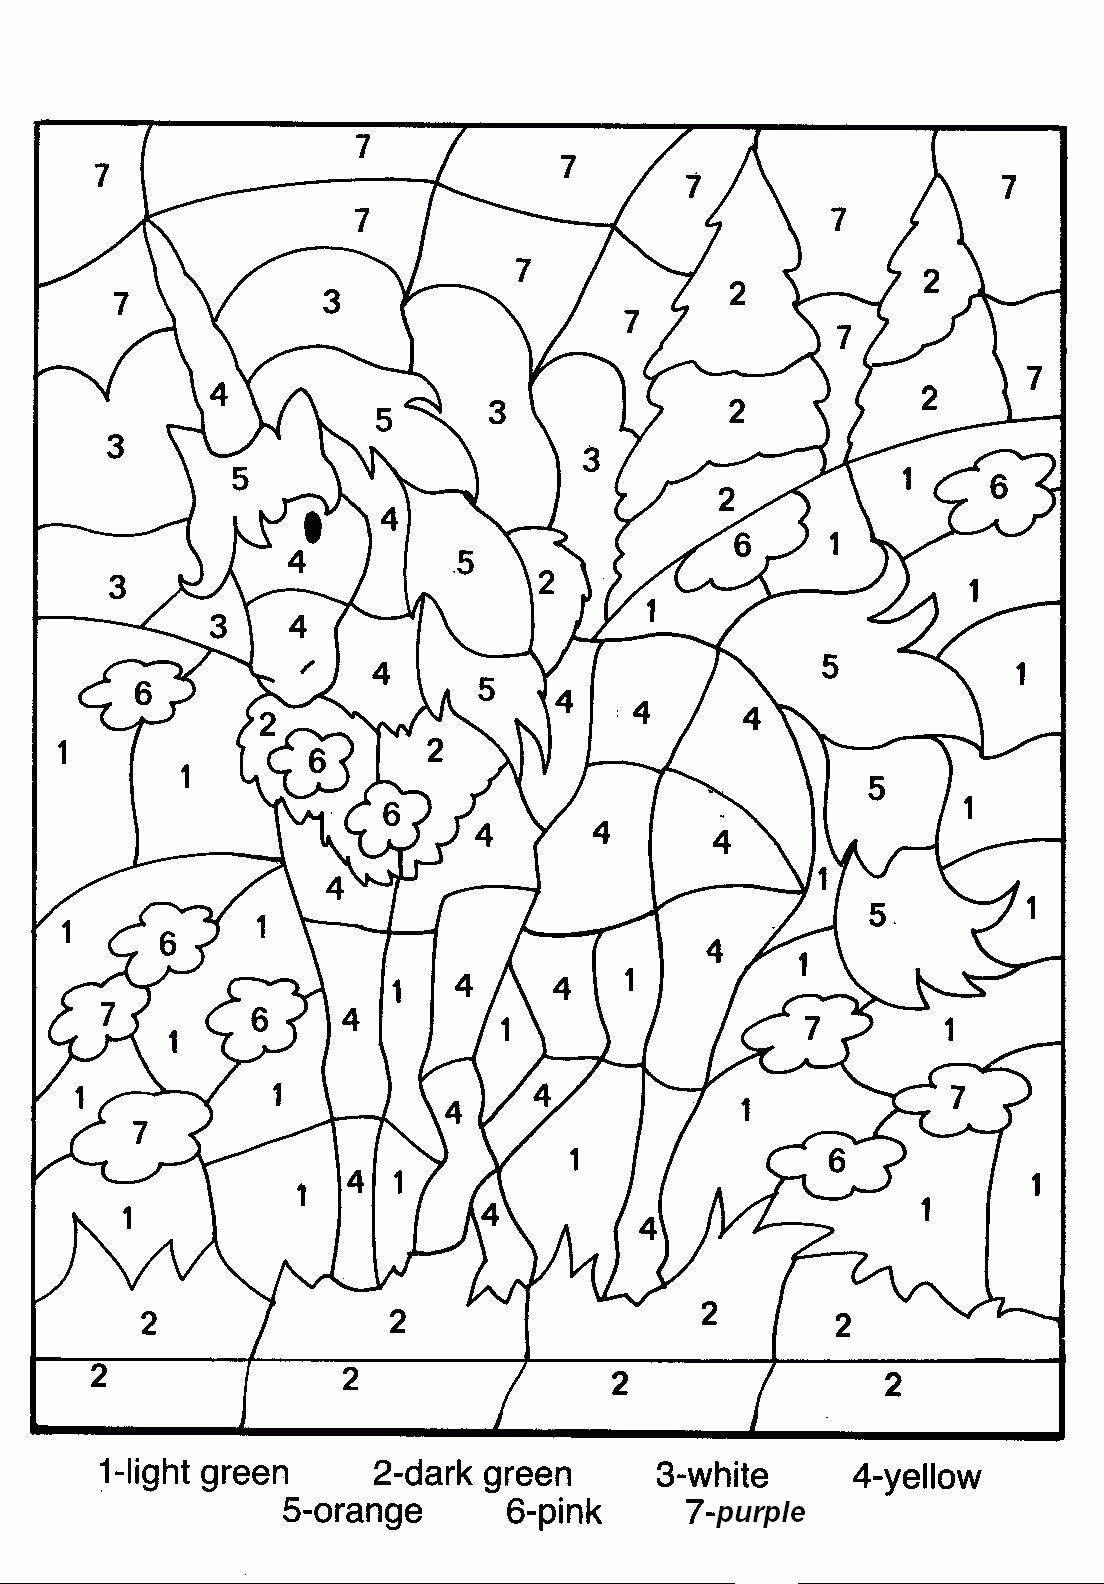 Colors Coloring Page - Coloring Page